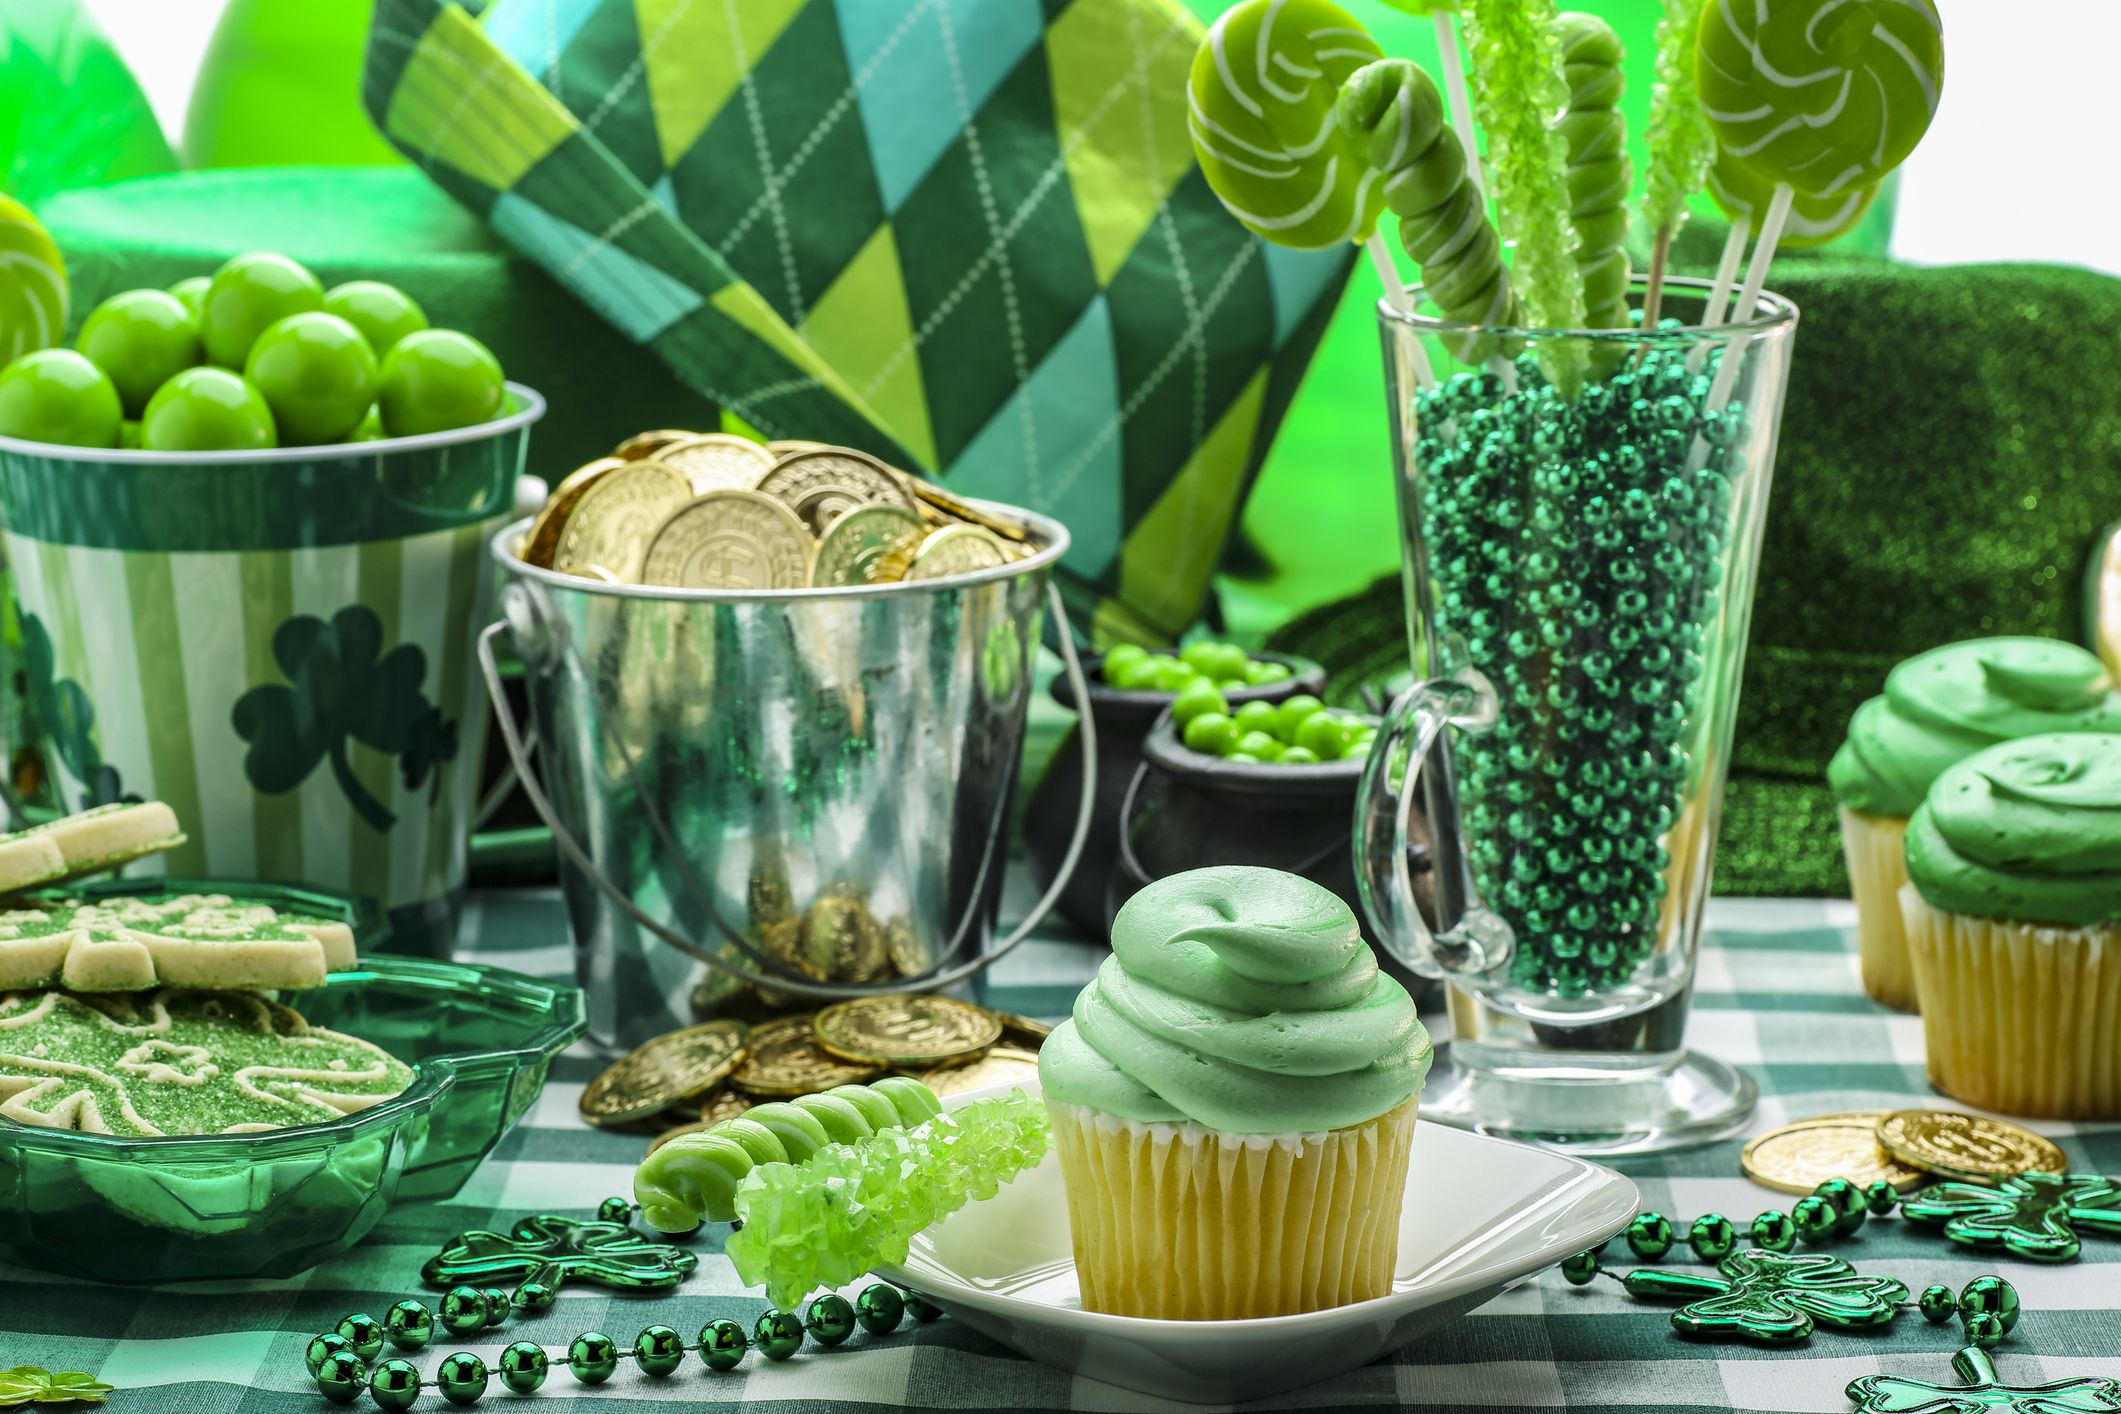 St. Patrick's Day Celebration Weekend, March 13 & 14 at PPL Center